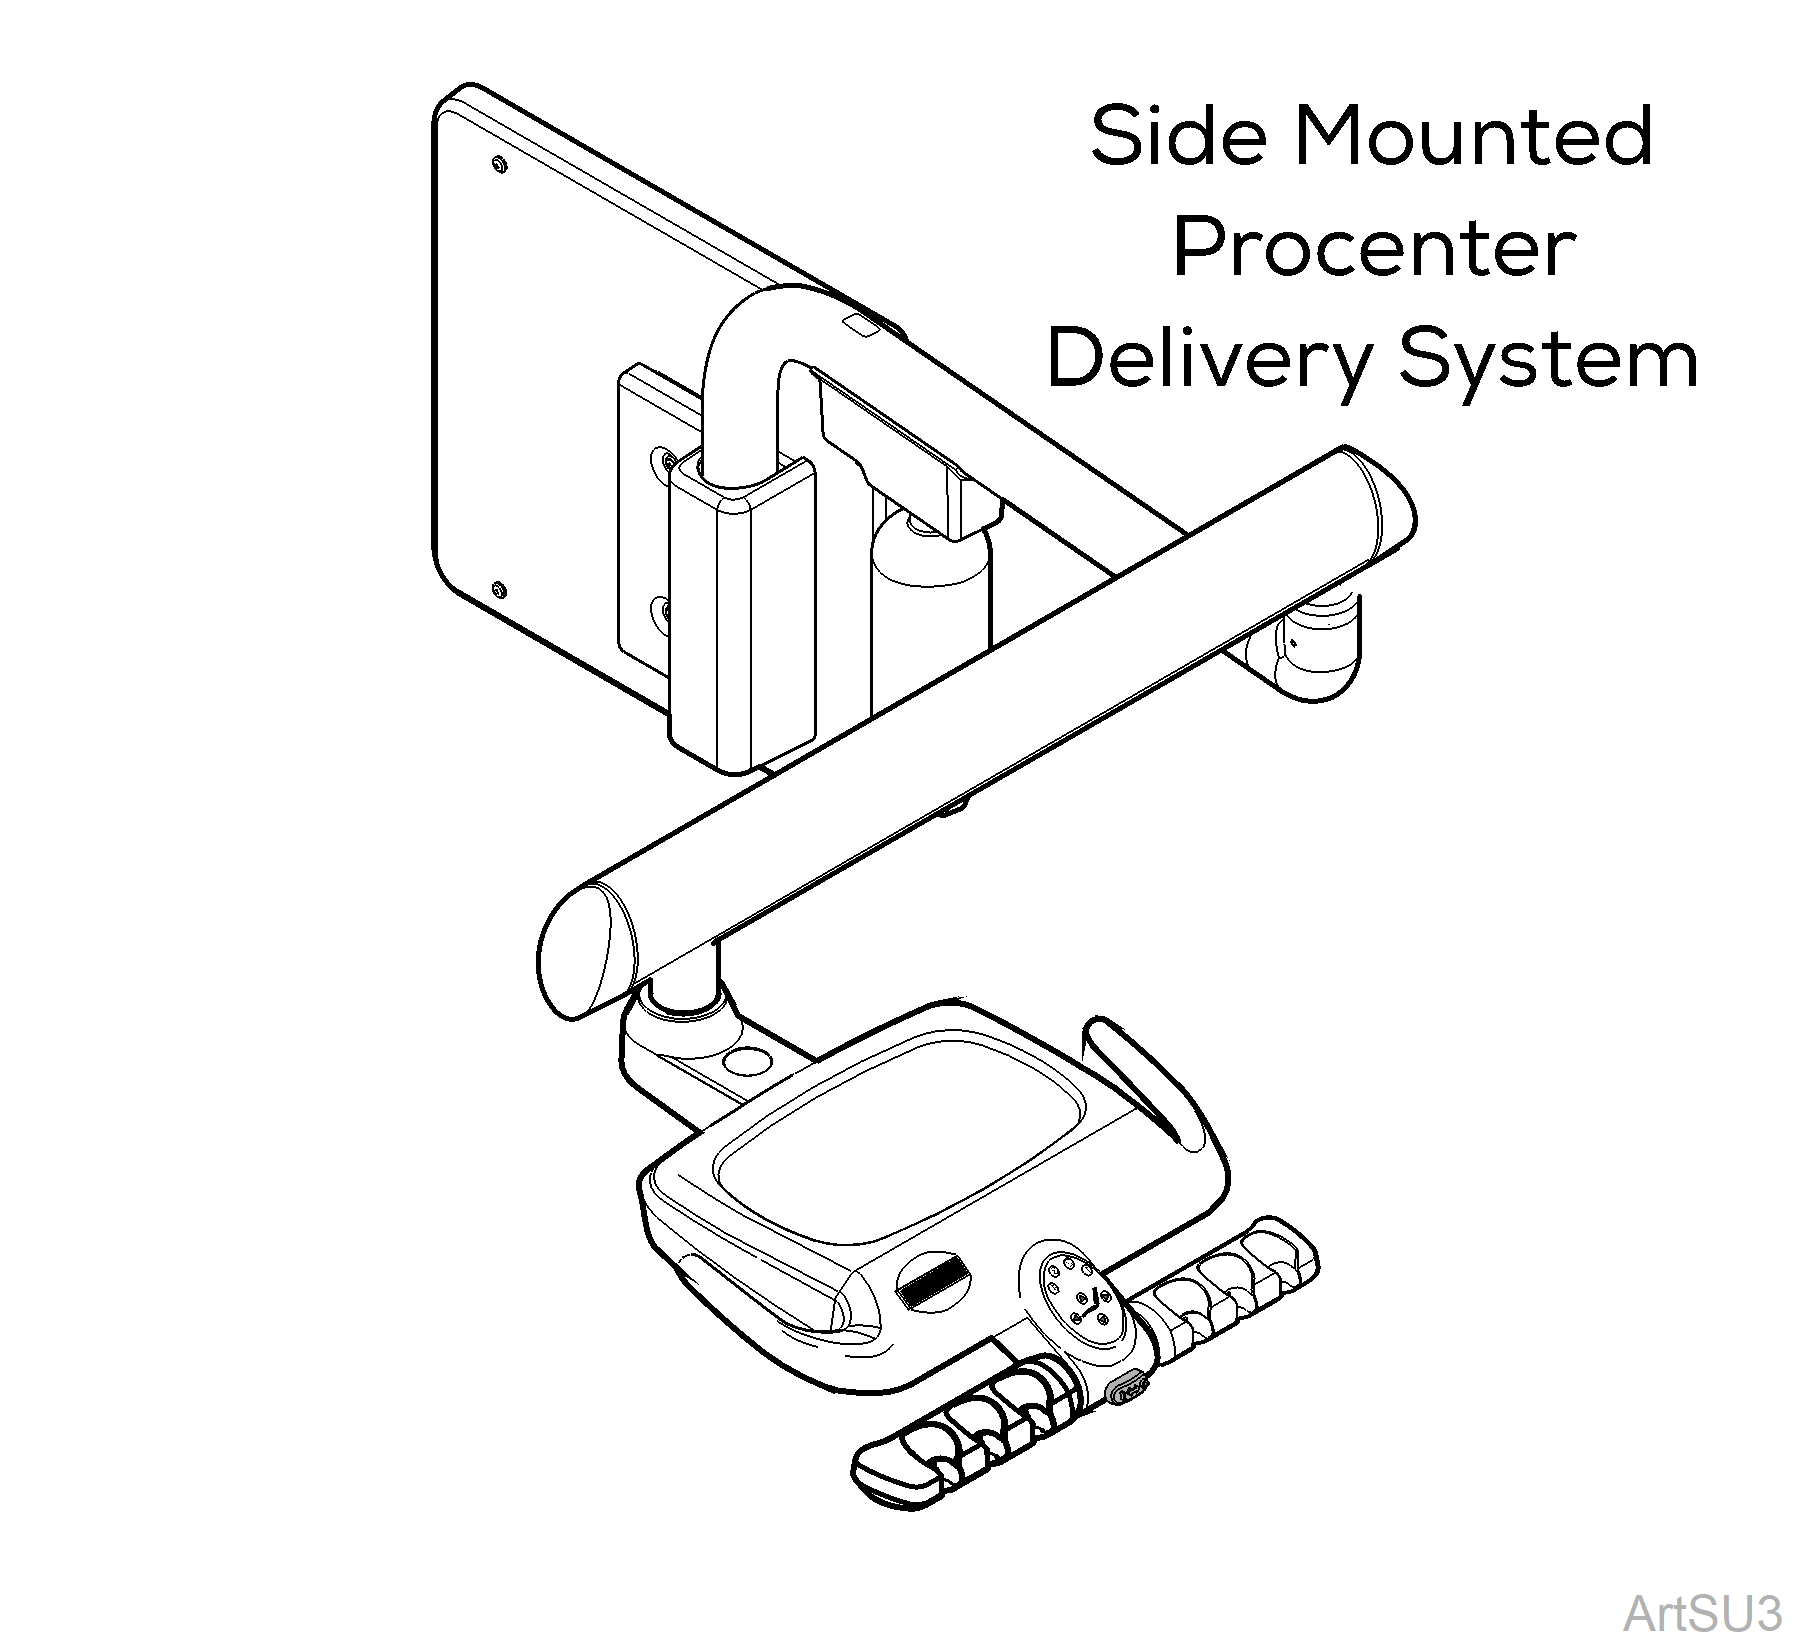 Side Mounted Procenter Delivery System